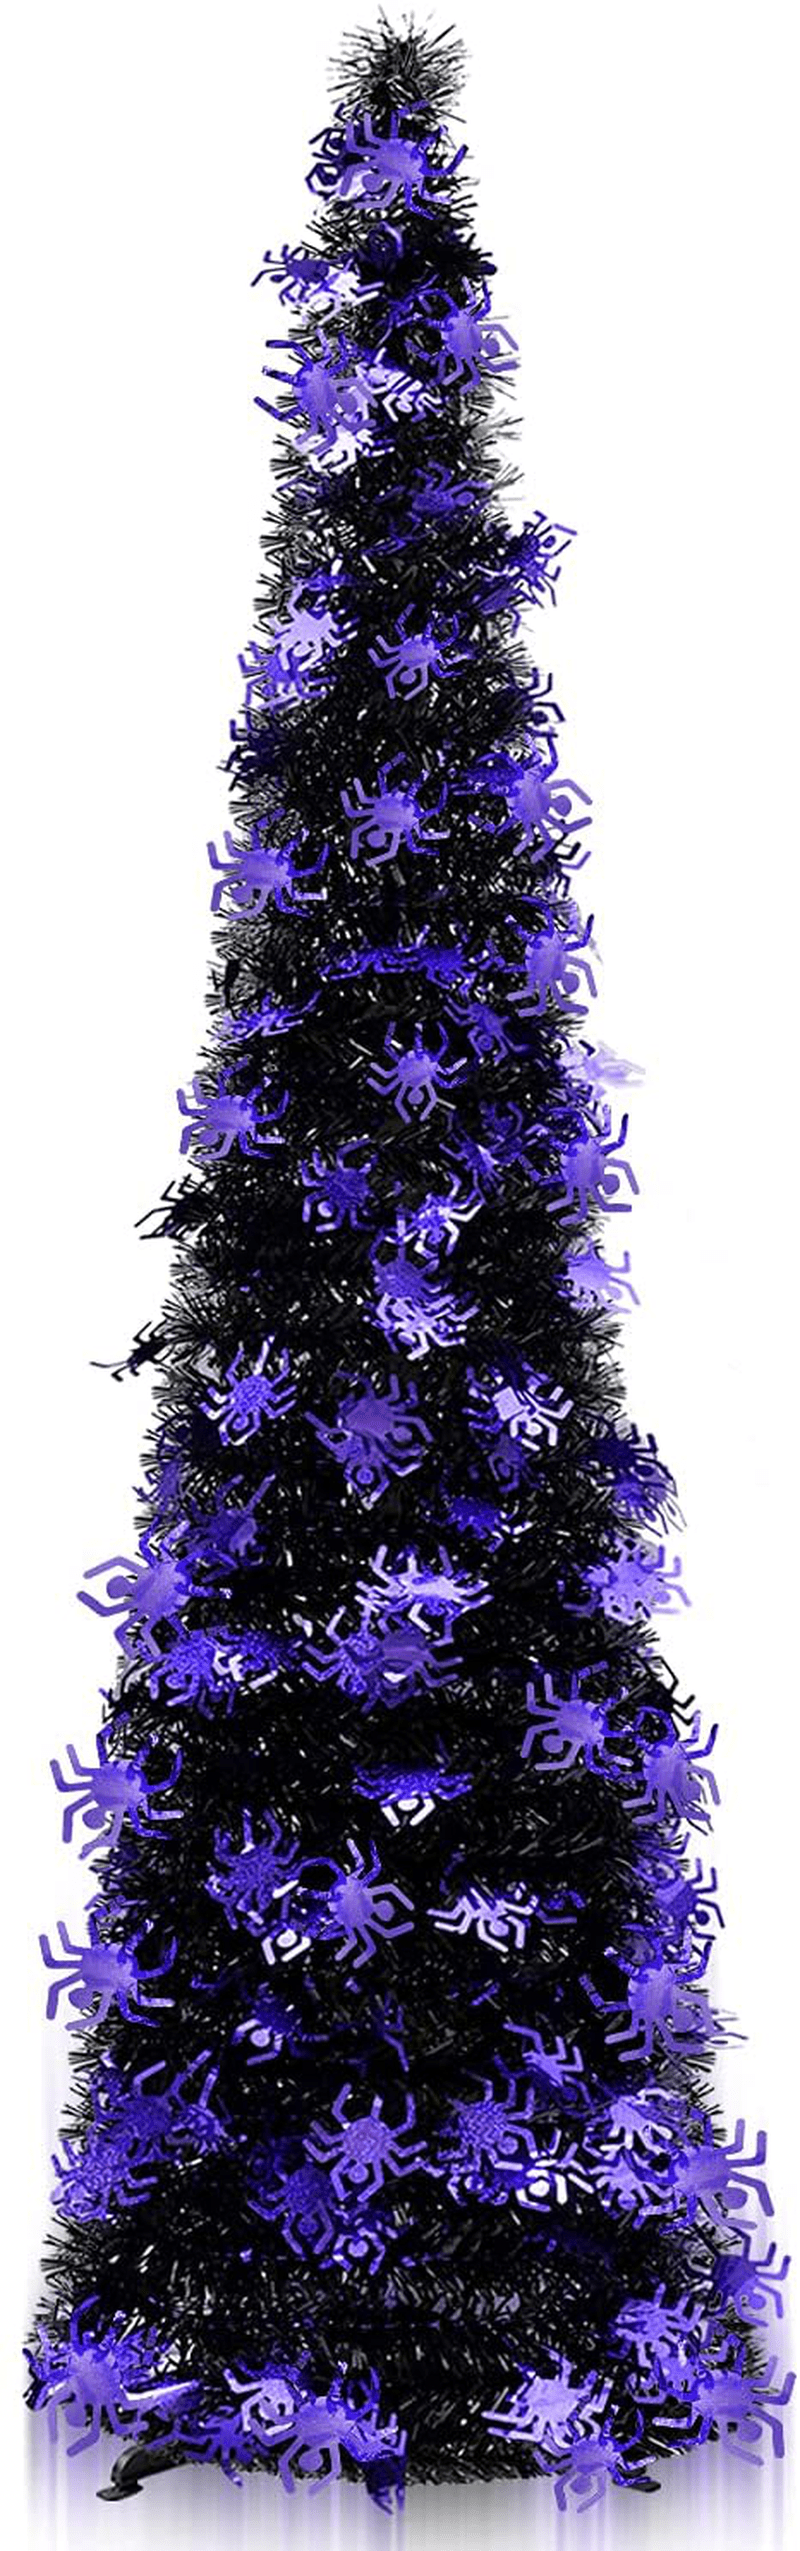 5' Pop Up Halloween Christmas Slim Tree Collapsible with Easy-Assembly Stand for Xmas Halloween Holiday Home, Office, Classroom Party Display. Black Tinsel Trees with Purple Spider Sequins